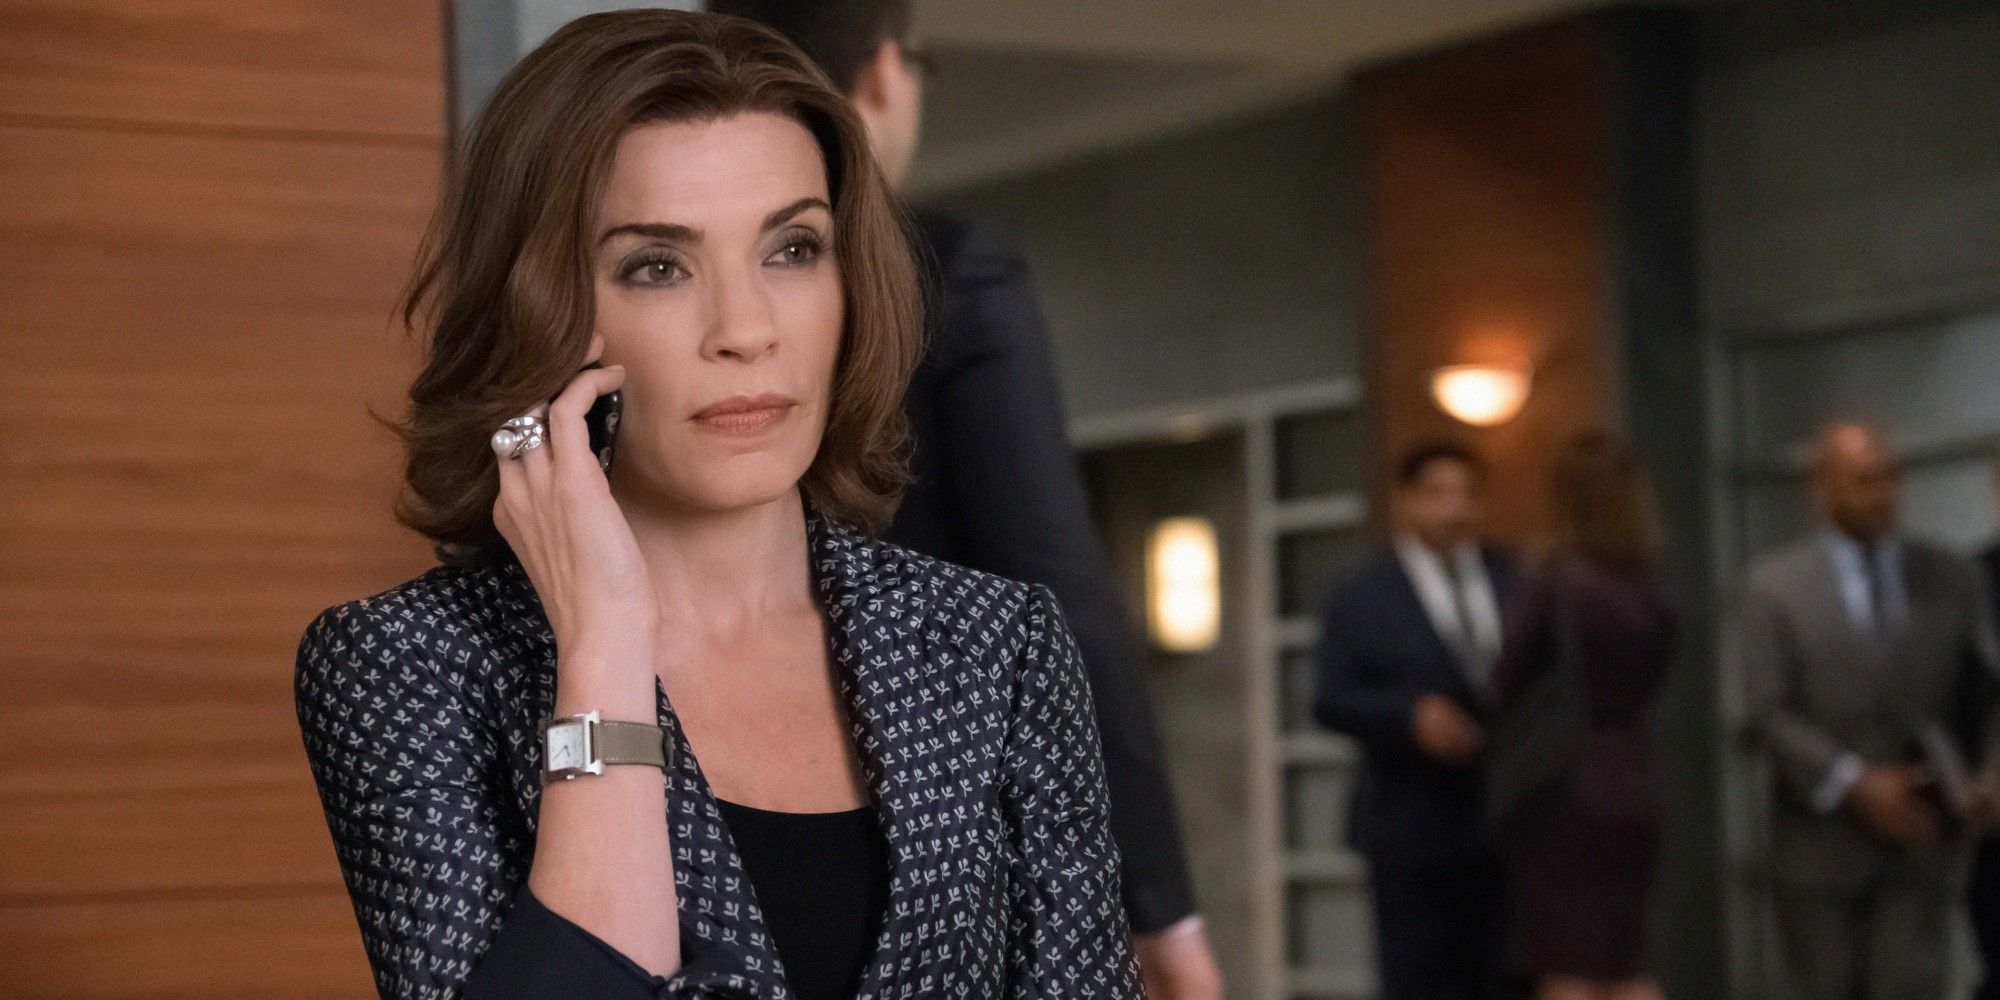 Alicia talks on the phone in The Good Wife